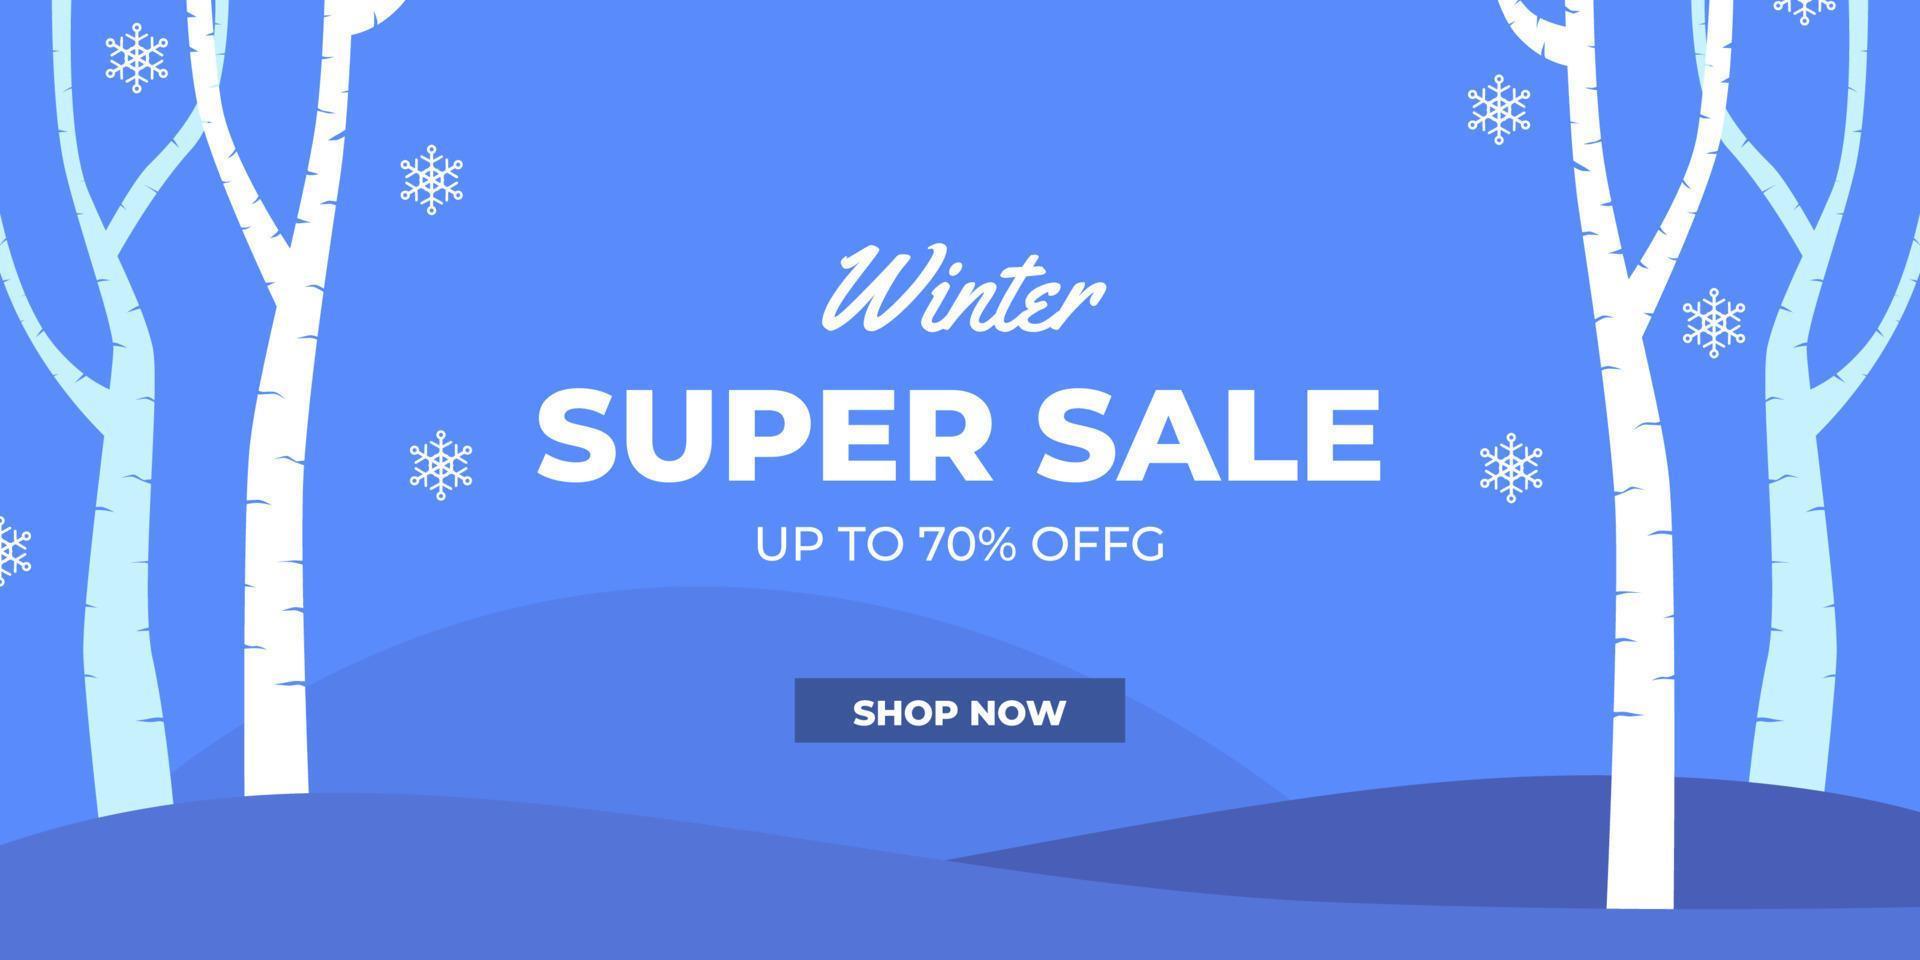 Super sale offer discount promotion label banner with winter landscape with tree branch vector